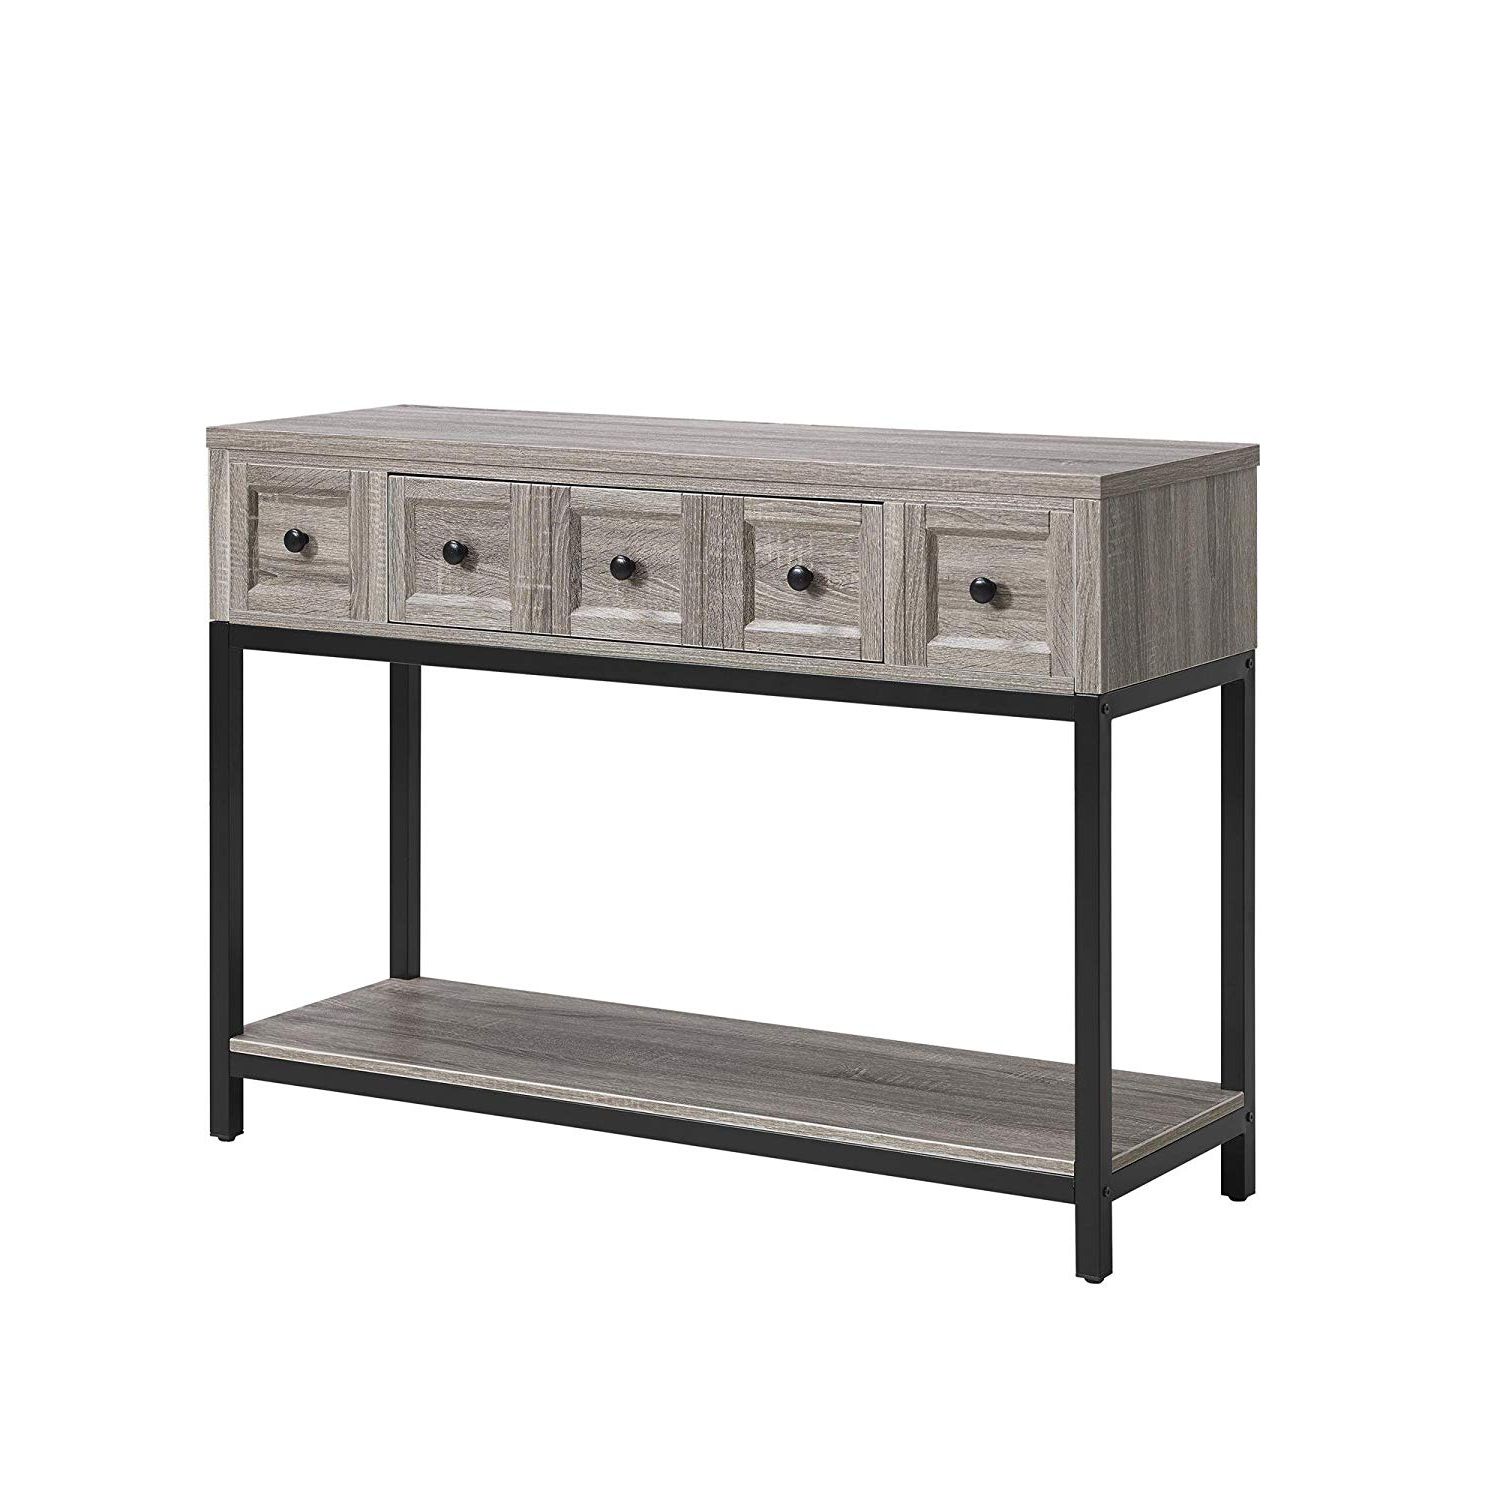 Parsons White Marble Top & Dark Steel Base 48x16 Console Tables Within Most Popular Amazon: Altra Furniture Console Table In Sonoma Oak Finish (View 16 of 20)